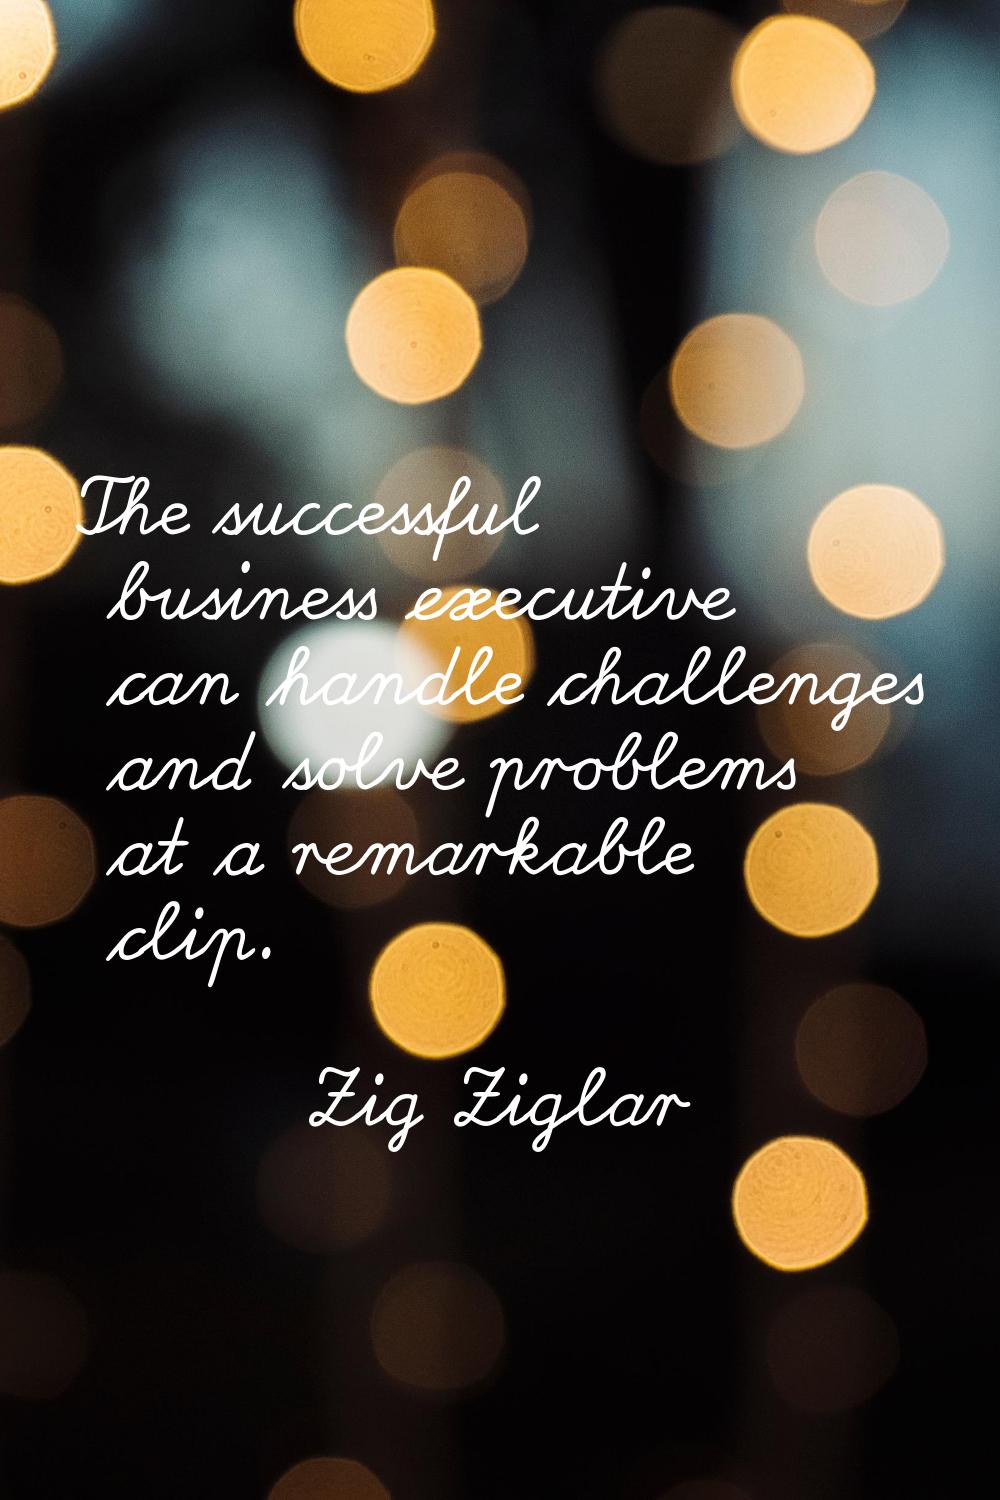 The successful business executive can handle challenges and solve problems at a remarkable clip.